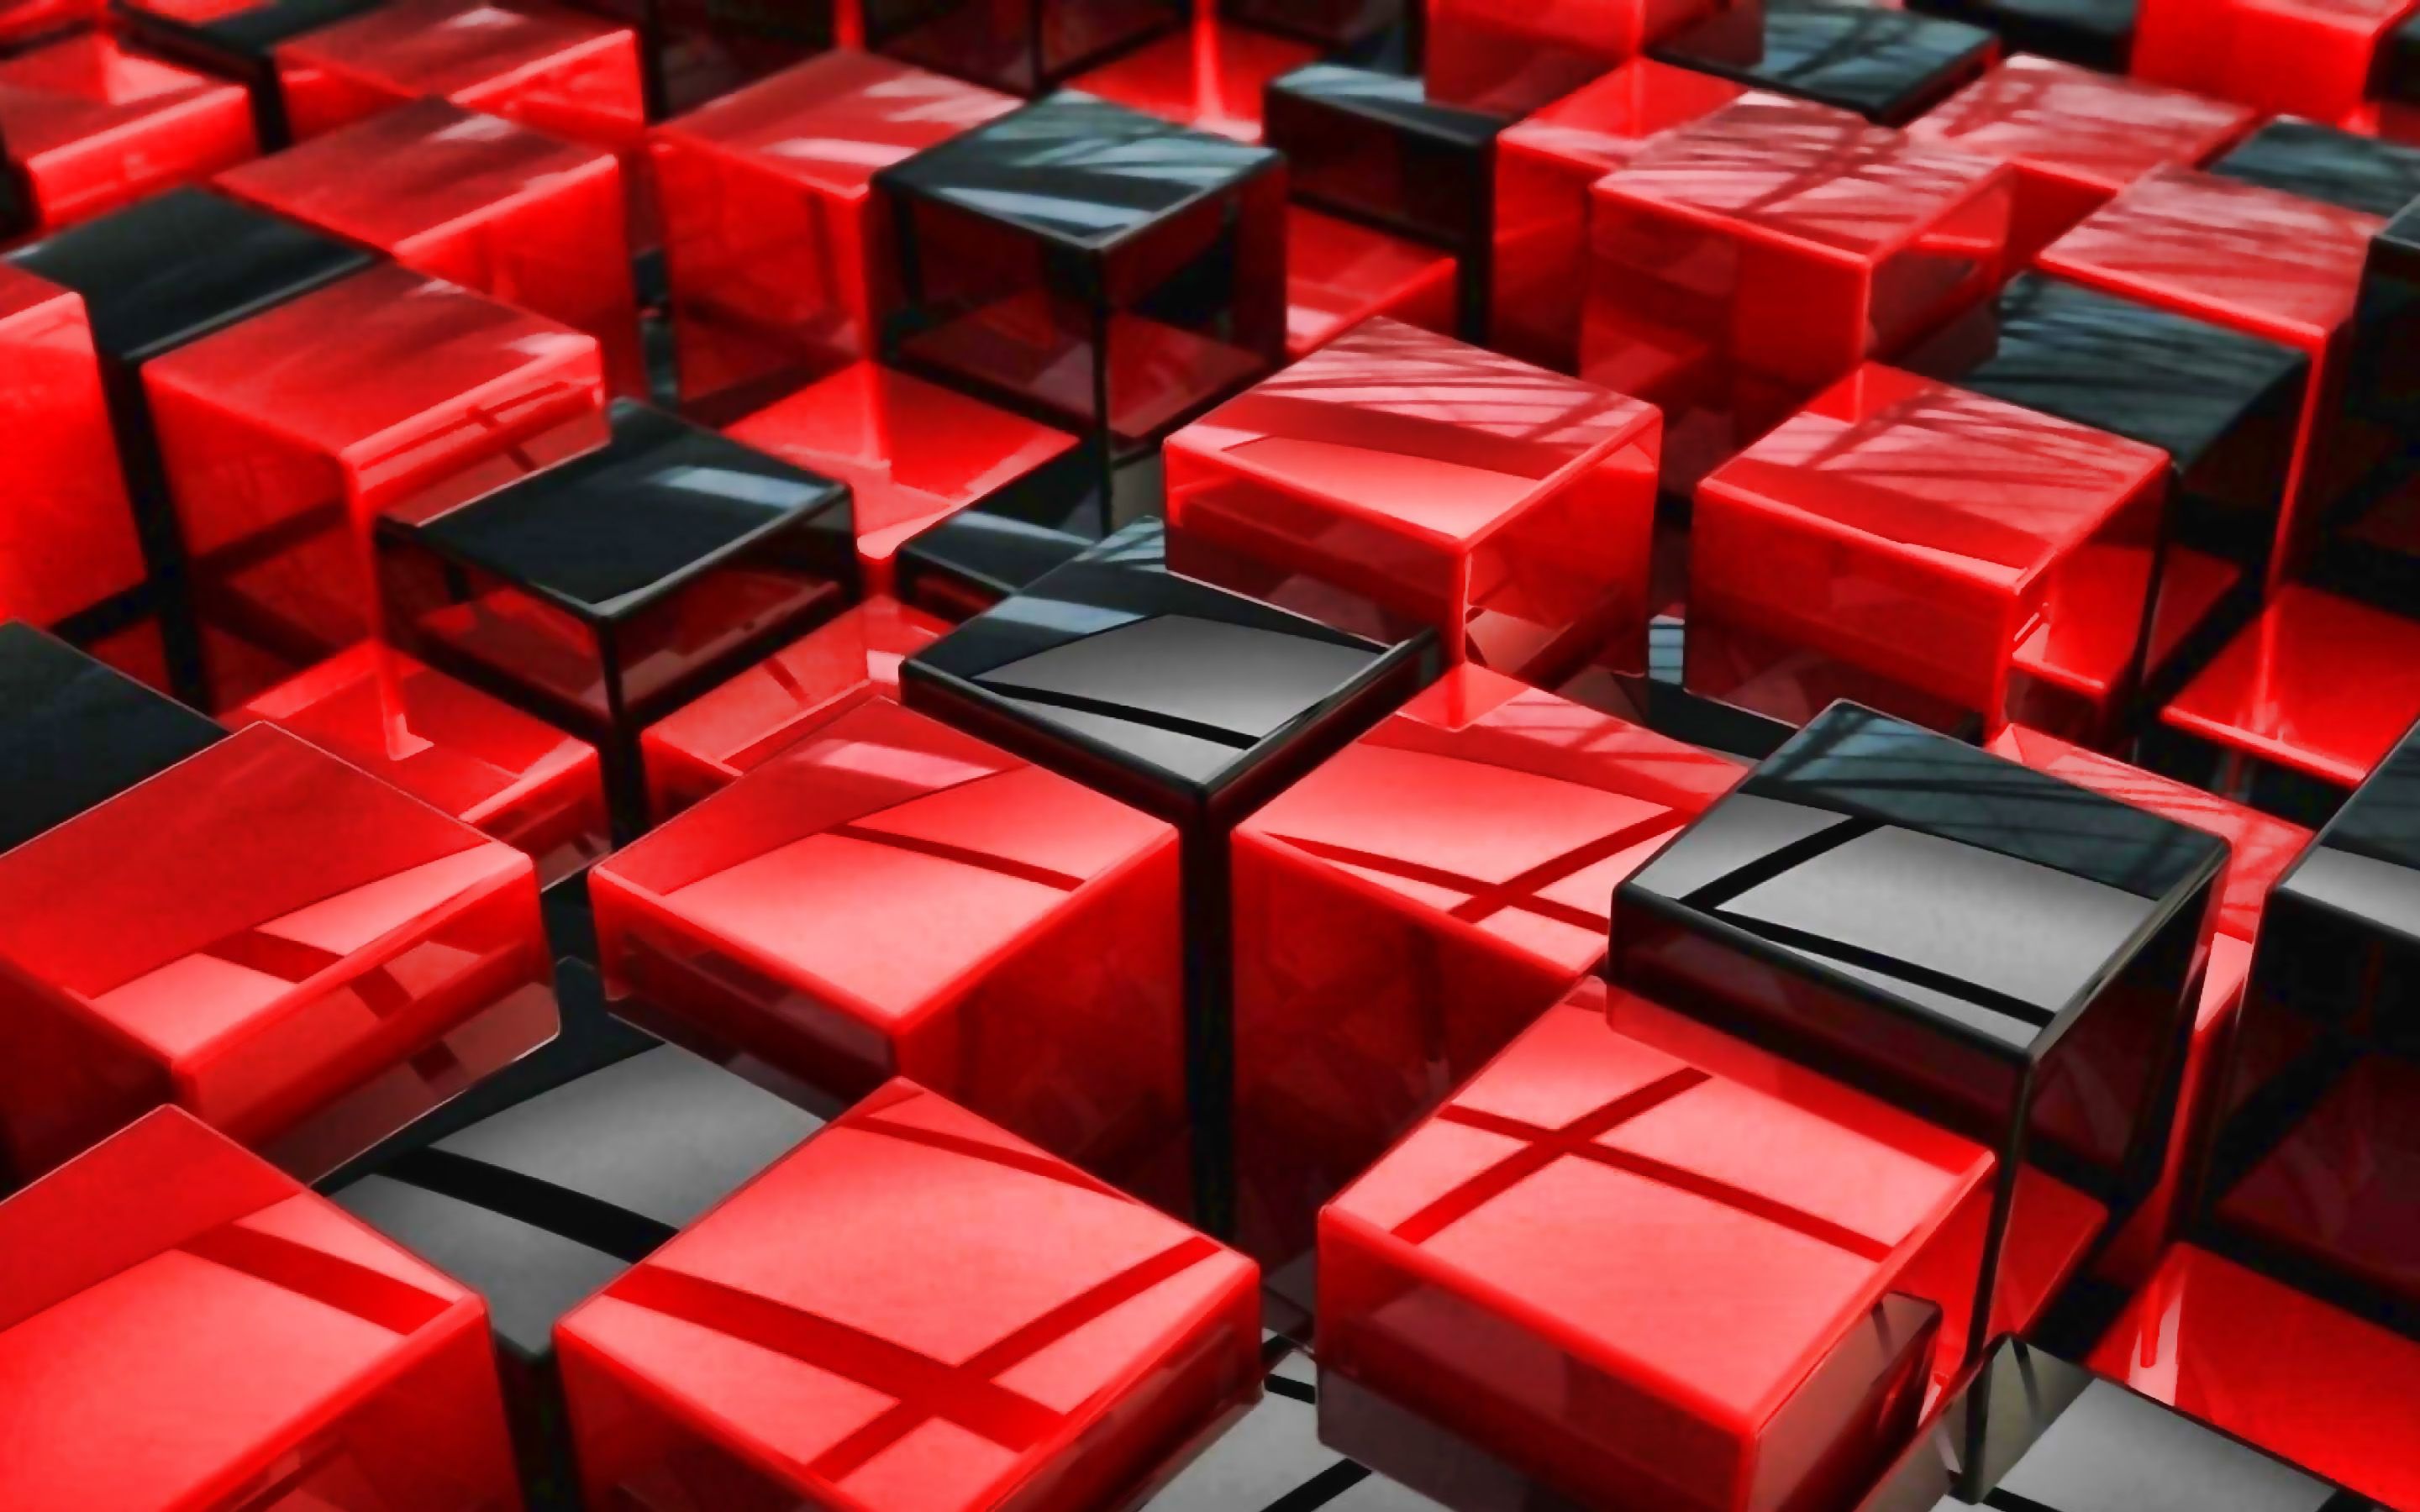 Download wallpaper red and black cubes, geometry, 3D art